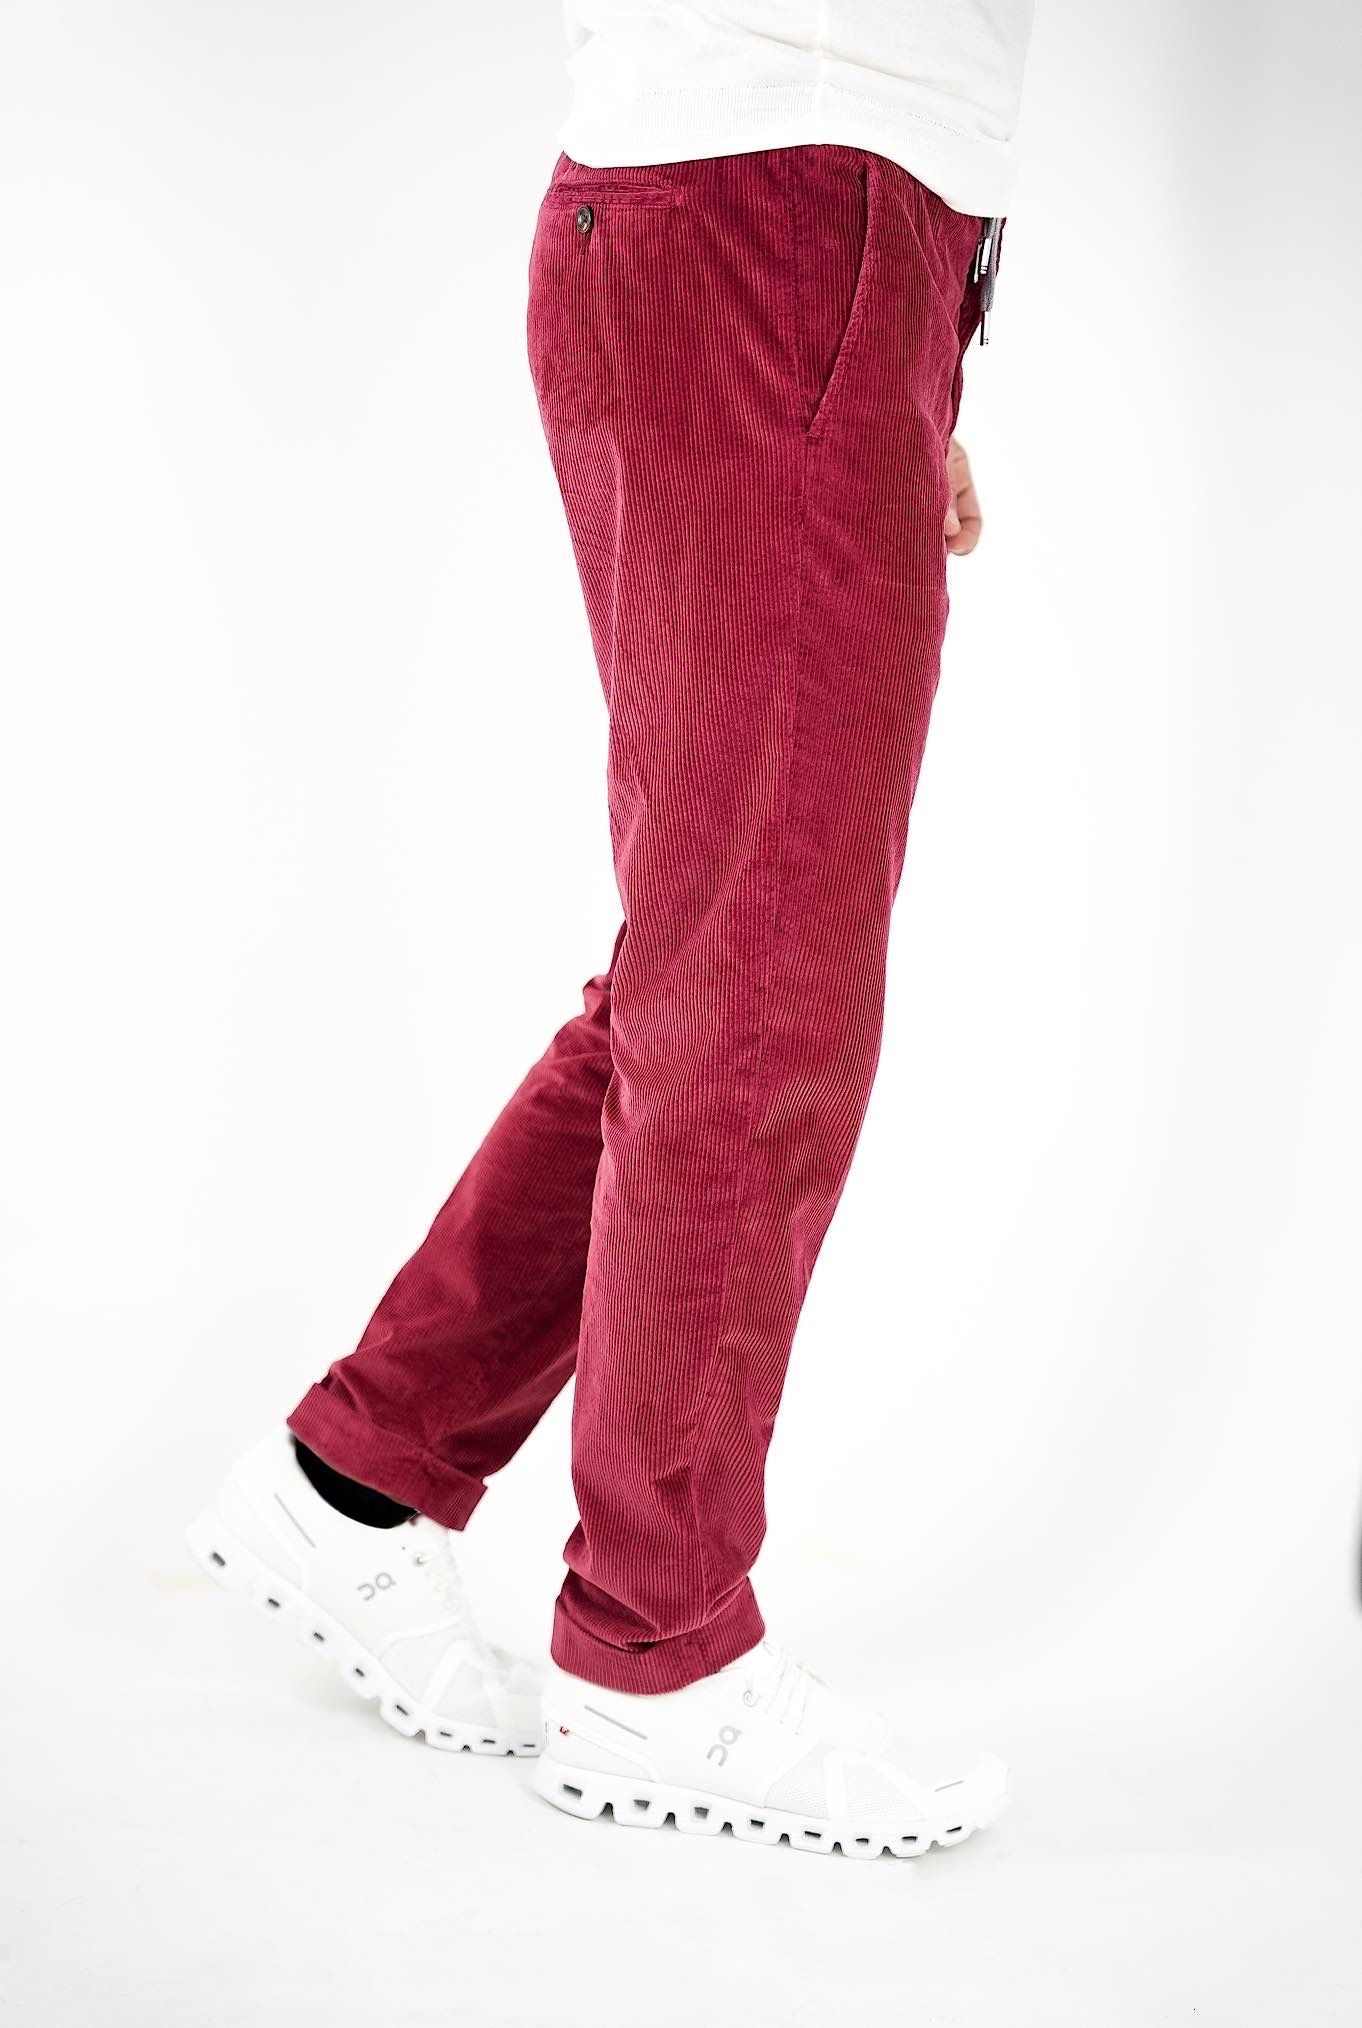 MARCO PESCAROLO Velvet Trousers with Red Drawstring